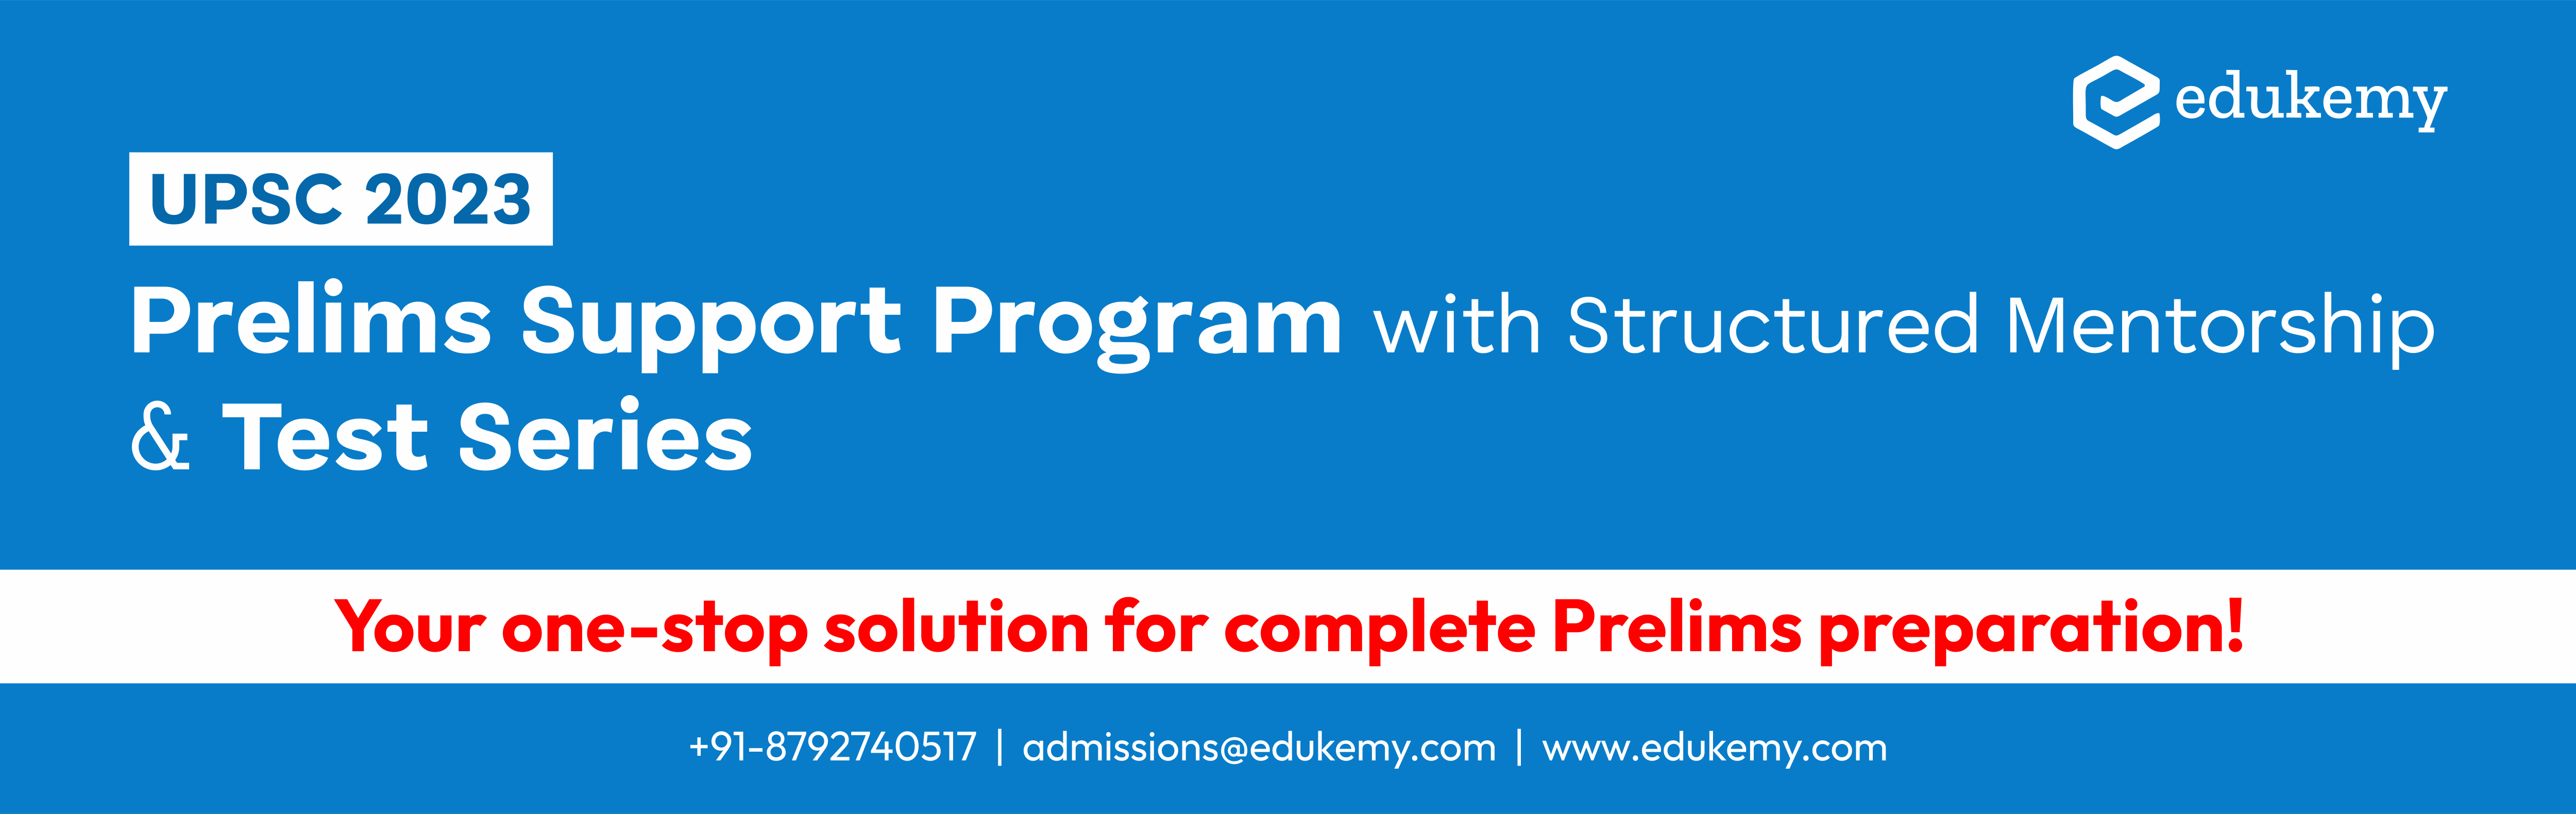 UPSC 2023 Prelims Support Program with Structured Mentorship & Test Series